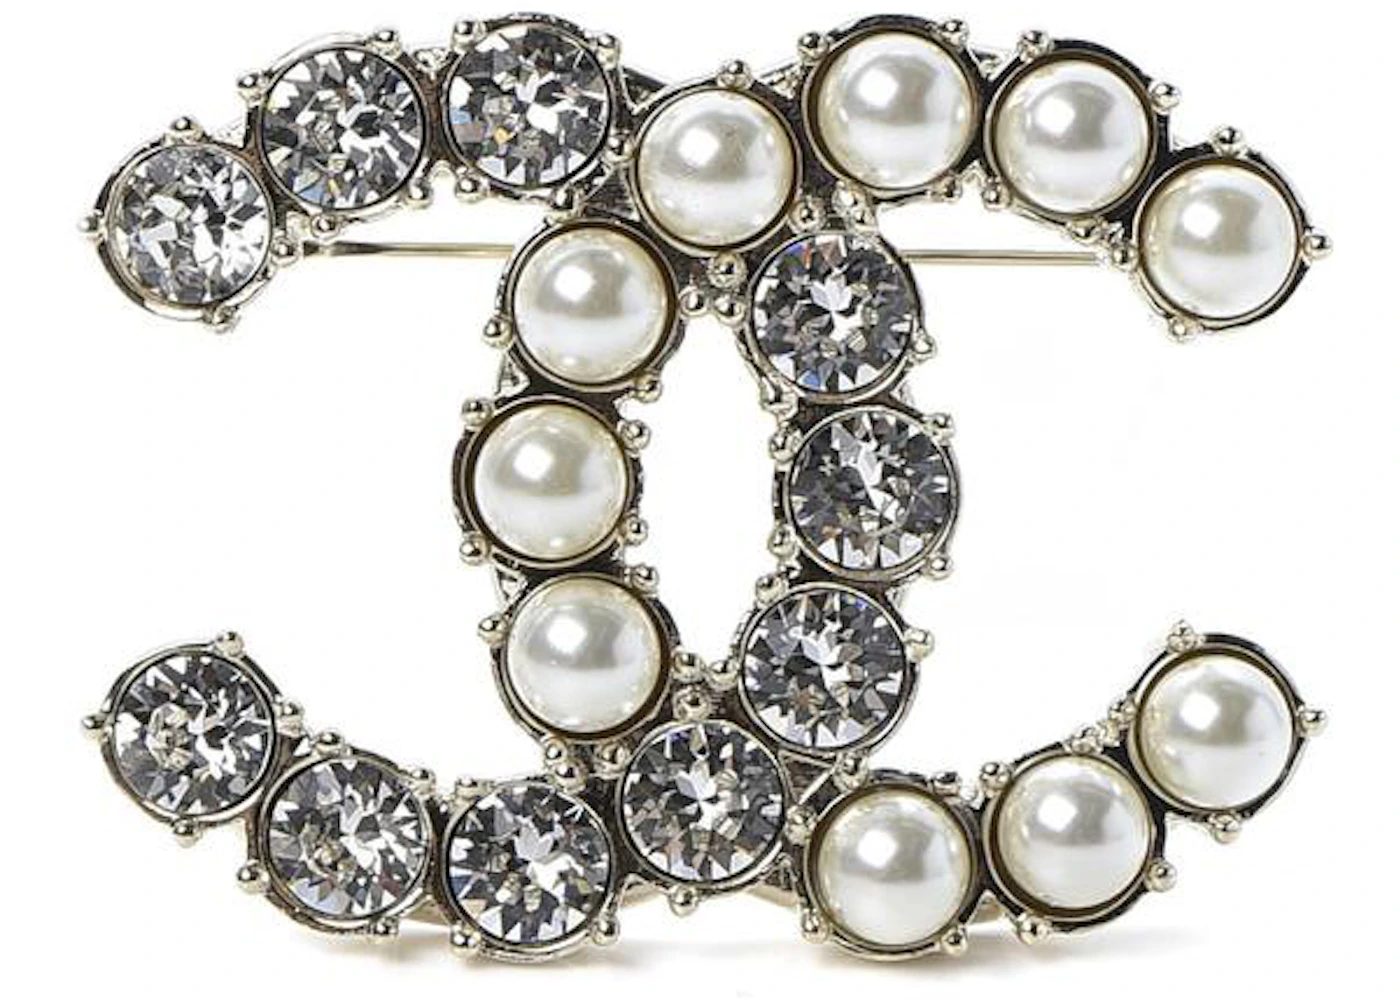 Chanel Crystal Brooch Gold in Gold Metal - US